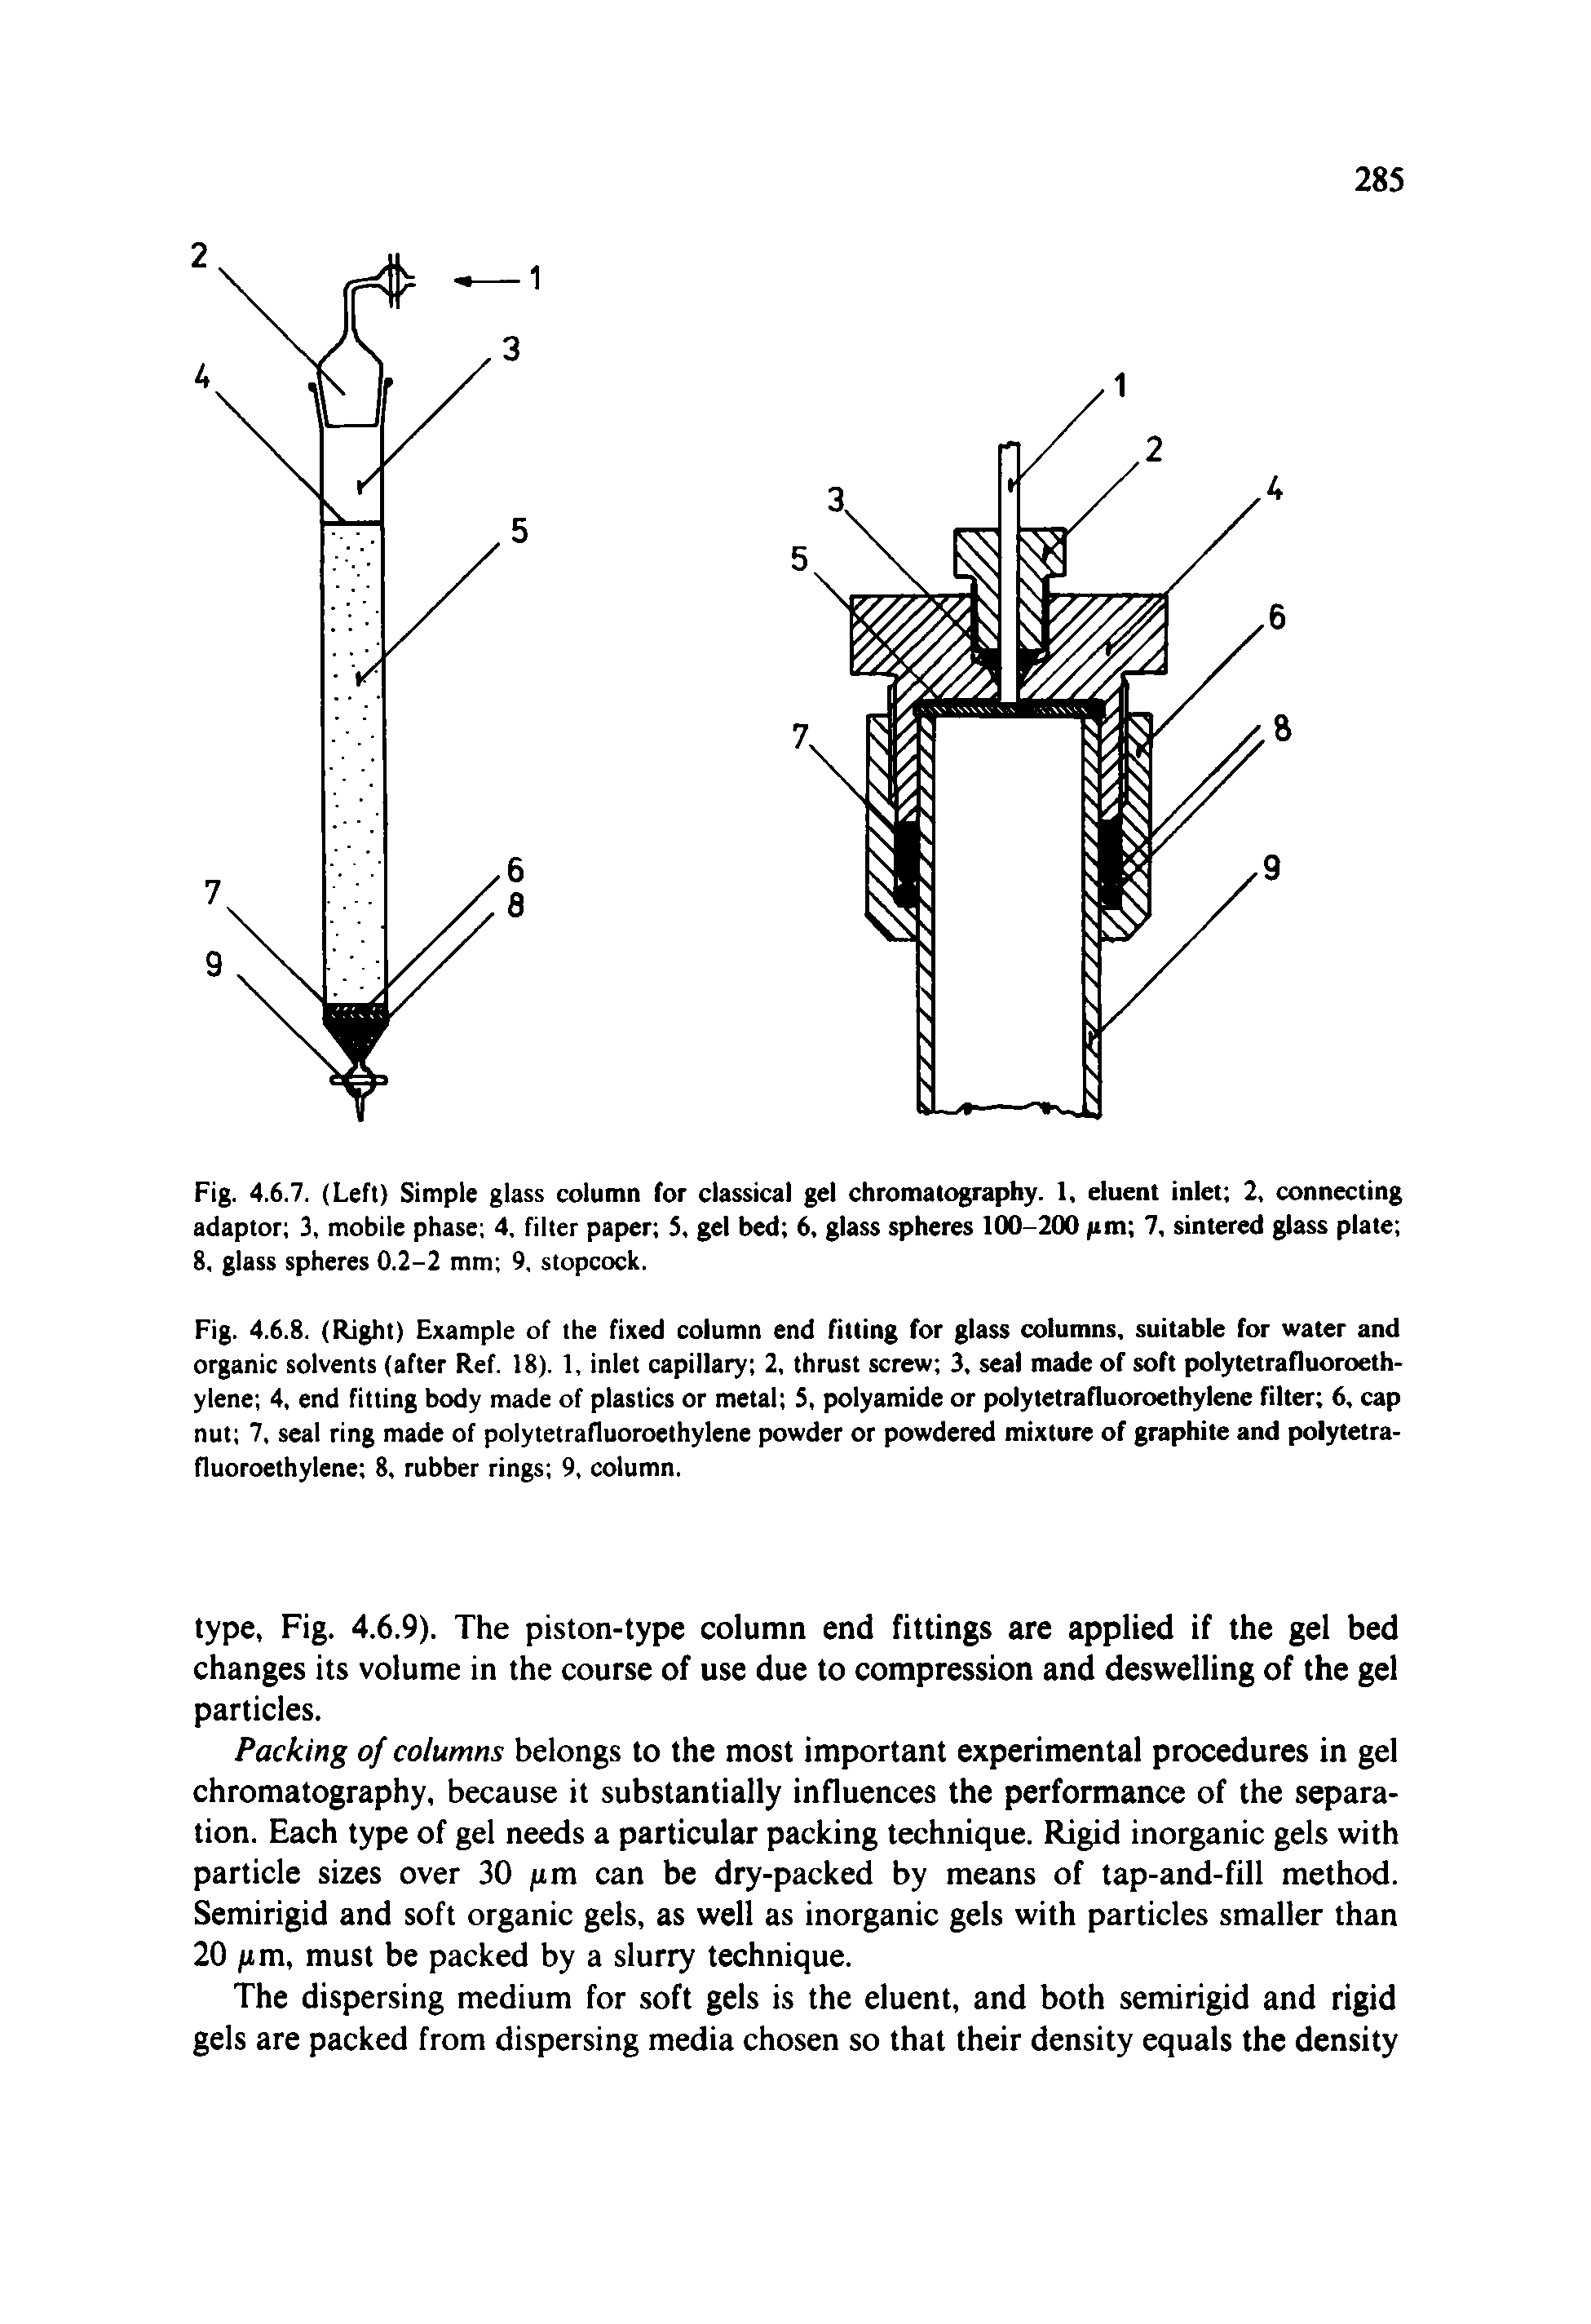 Fig. 4.6.8. (Right) Example of the fixed column end fitting for glass columns, suitable for water and organic solvents (after Ref. 18). 1, inlet capillary 2, thrust screw 3, seal made of soft polytetrafluoroeth-ylene 4, end fitting body made of plastics or metal 5, polyamide or polytetrafluoroethylene filter 6, cap nut 7, seal ring made of polytetrafluoroethylene powder or powdered mixture of graphite and polytetrafluoroethylene 8, rubber rings 9, column.